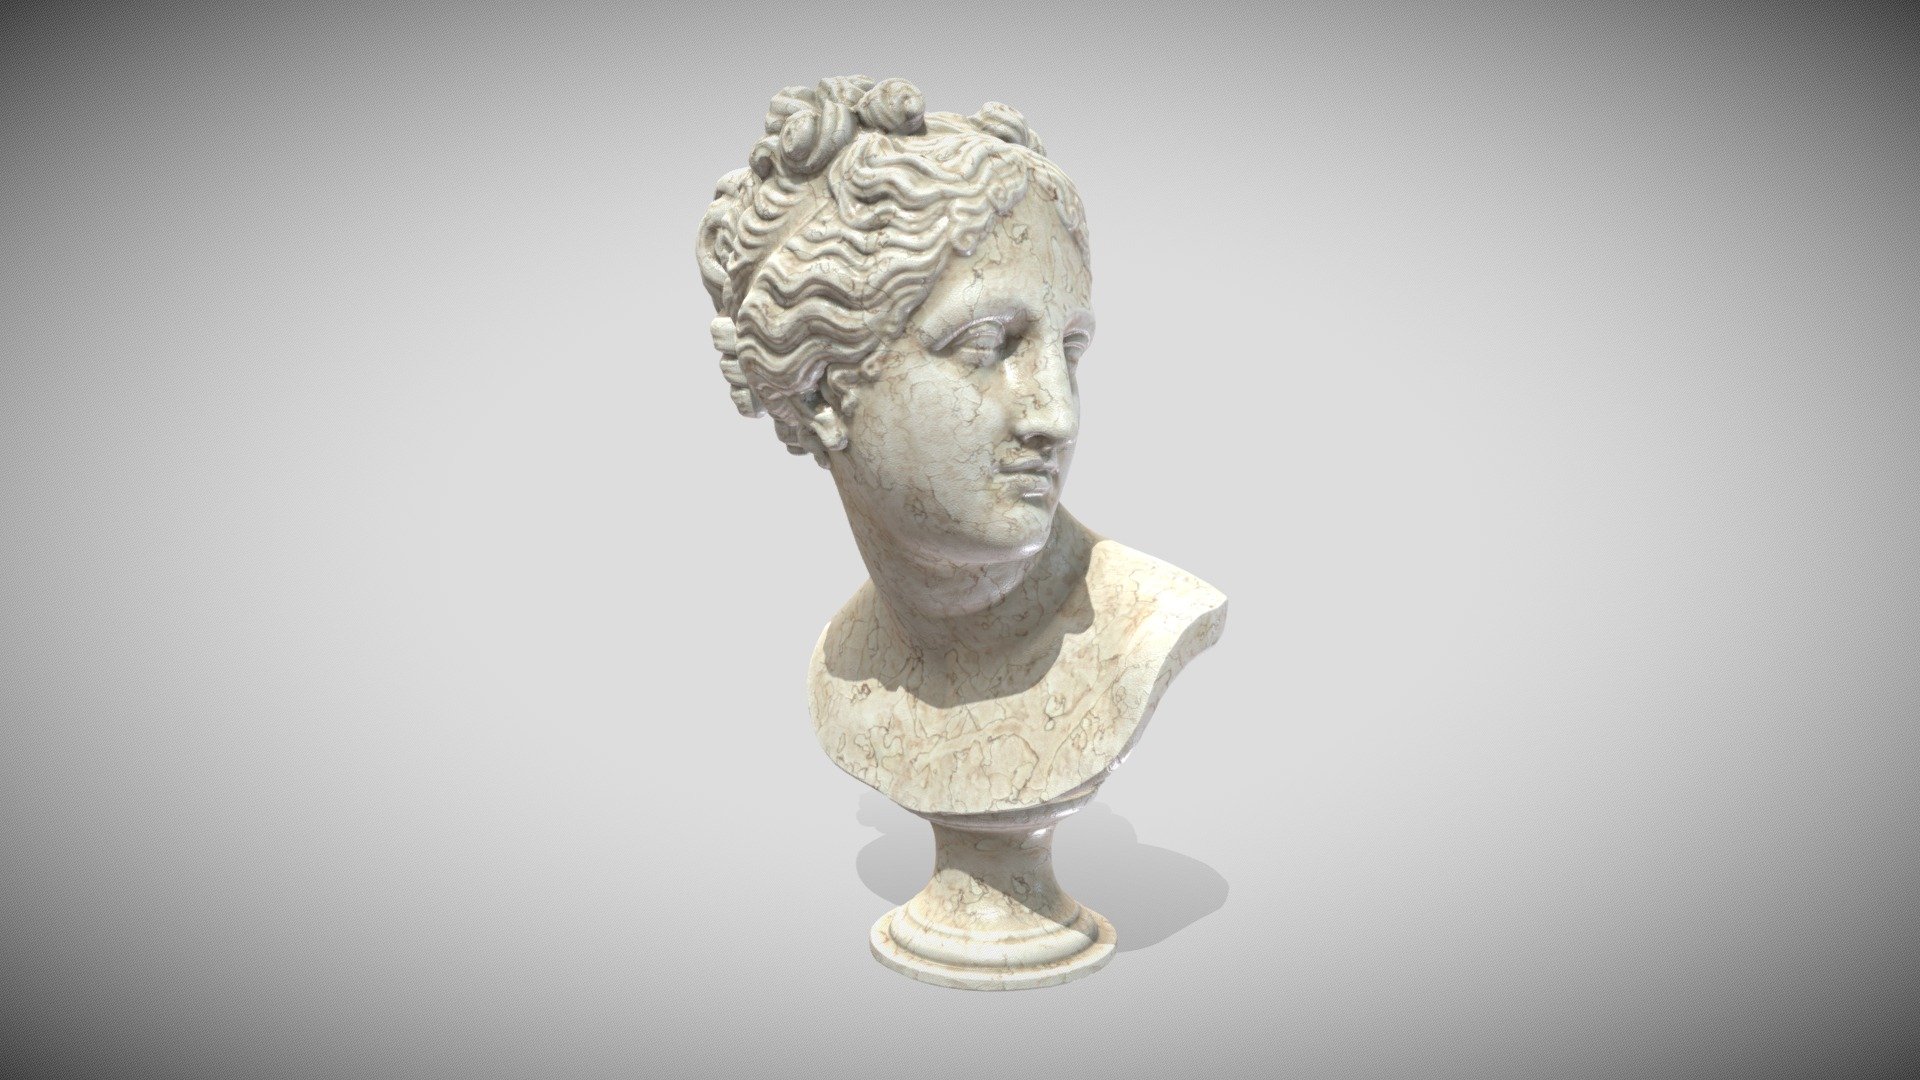 Original very nice 3D Scan from the SMK - Statens Museum for Kunst

https://www.myminifactory.com/object/3d-print-venus-italica-102804

here the Painted Gaming Version LR... 3d model